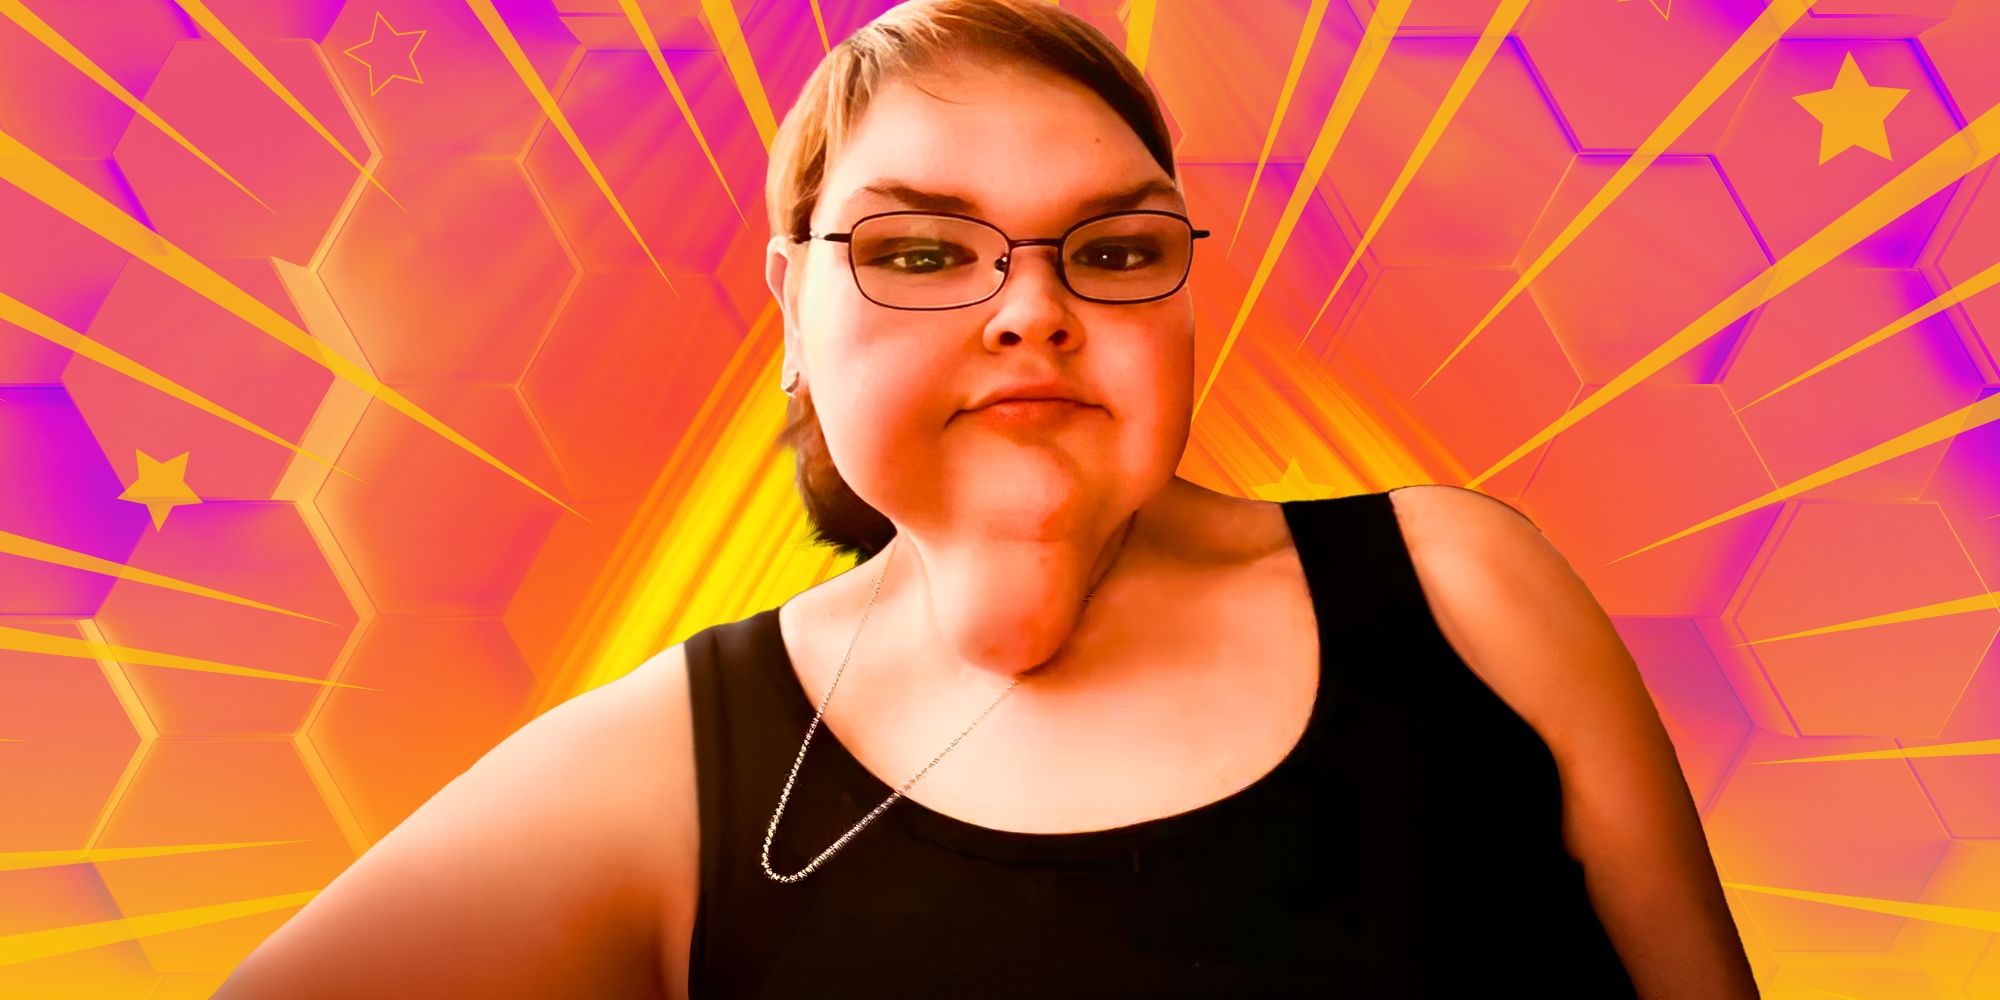  1000-Lb Sisters' Tammy Slaton wearing a sleeveless black top and glasses.